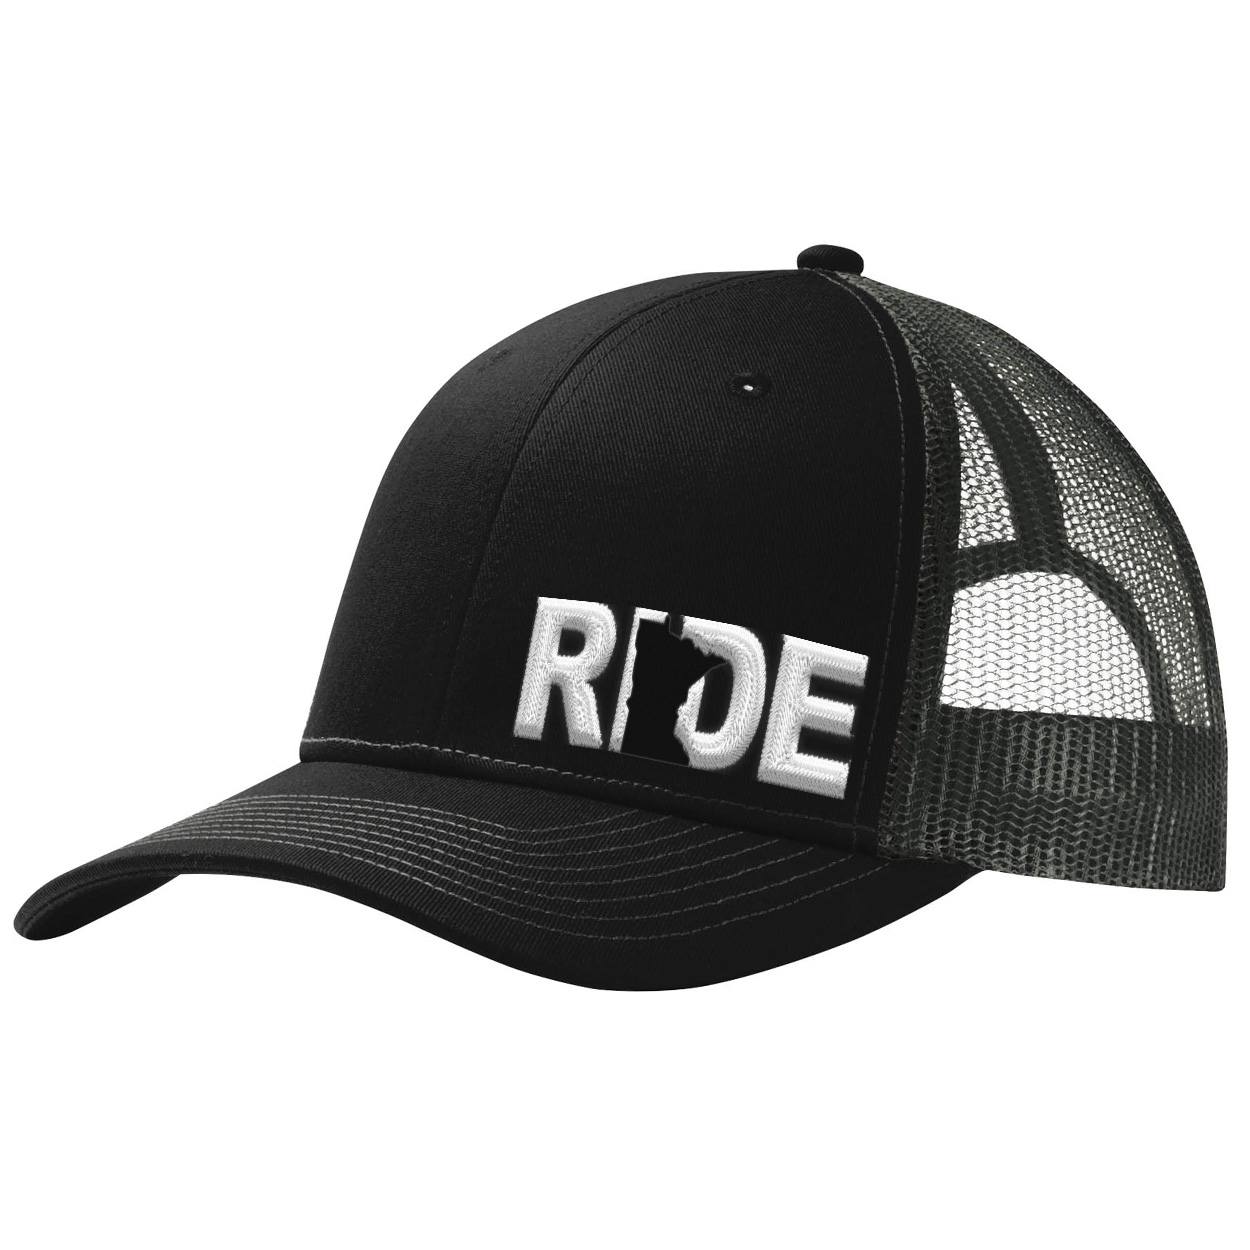 Ride Minnesota Night Out Pro Embroidered Snapback Trucker Hat Black/Gray